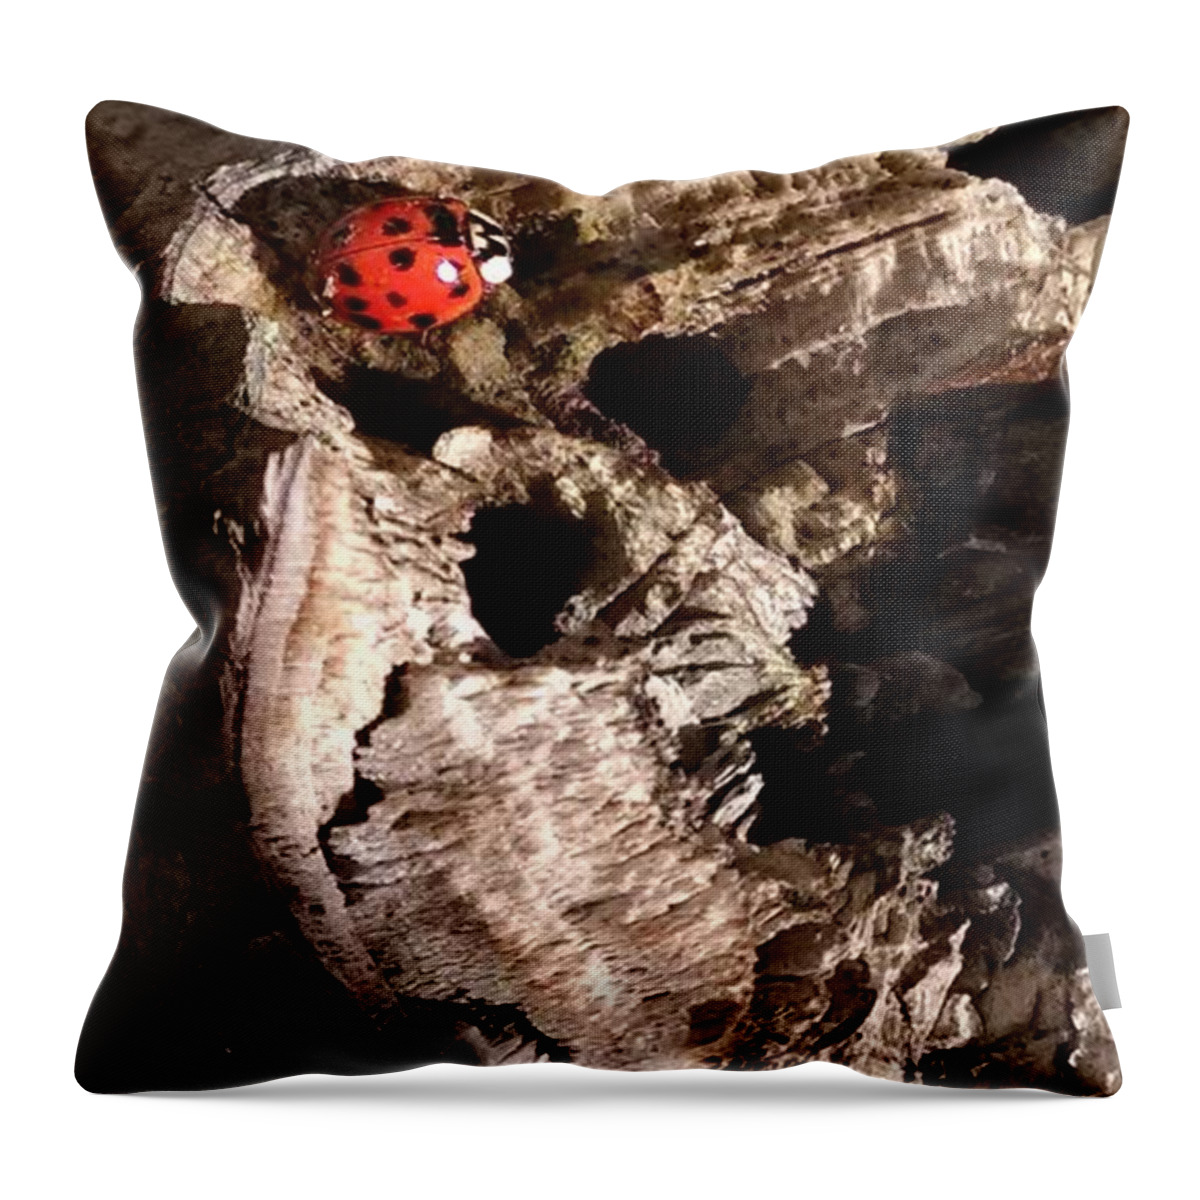 Ladybug Throw Pillow featuring the photograph Just A Place To Rest by Allen Nice-Webb